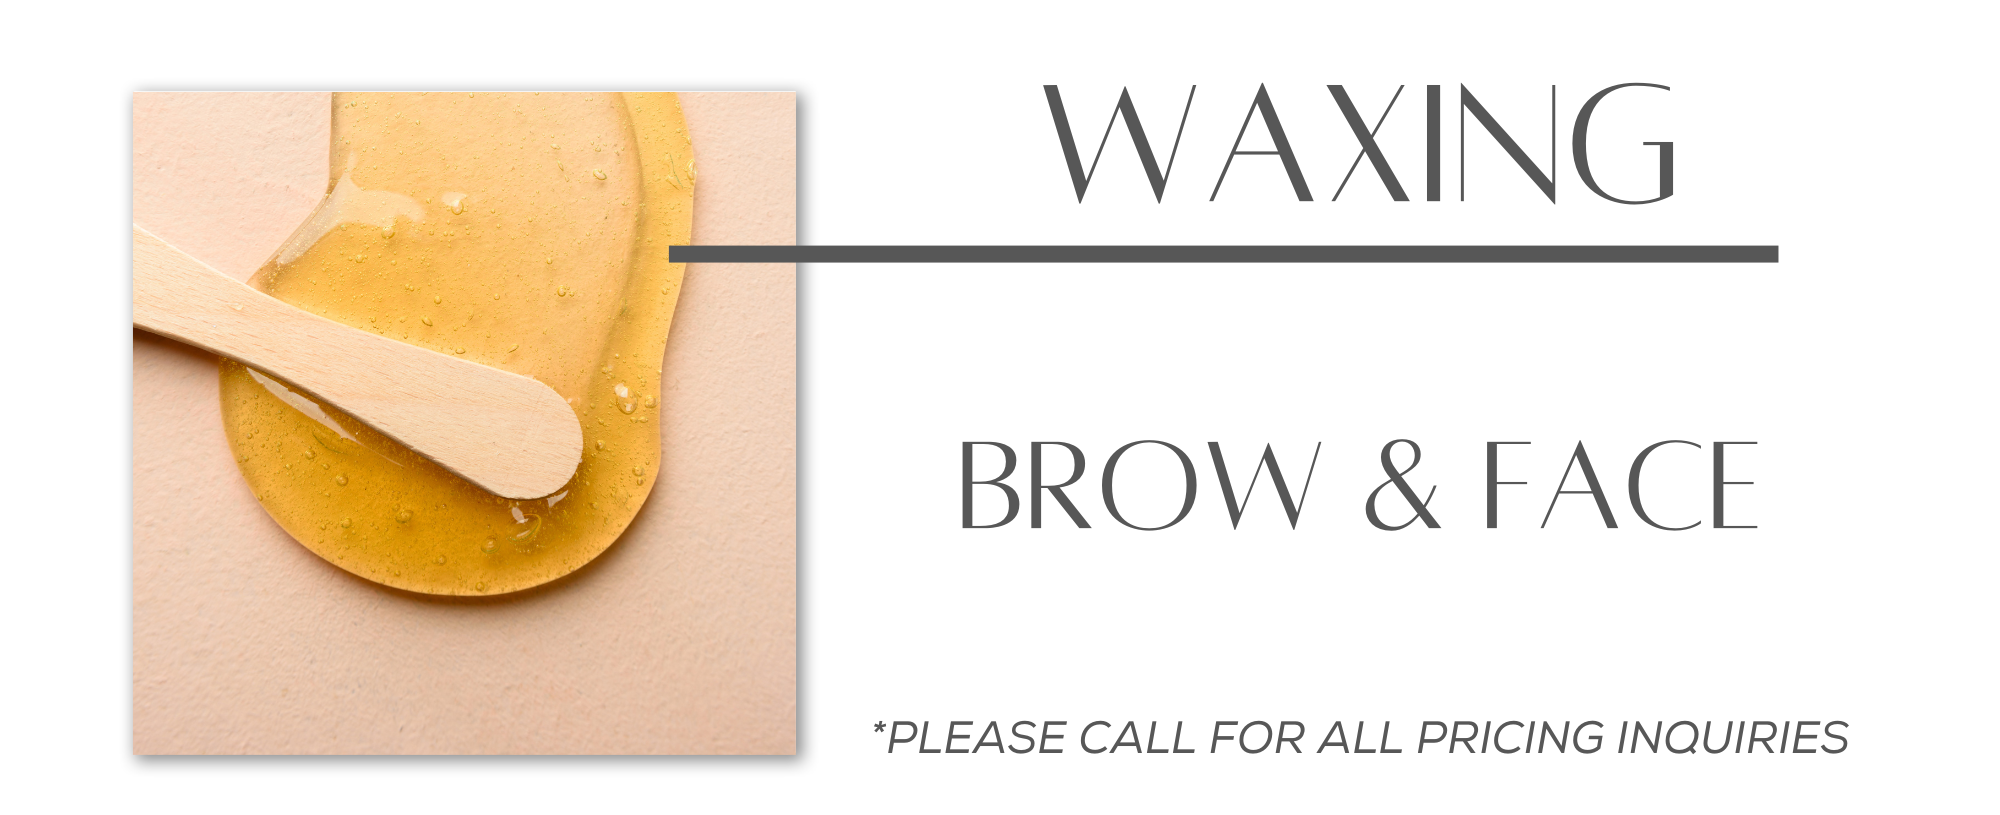 waxing brow and face waxing call for pricing details